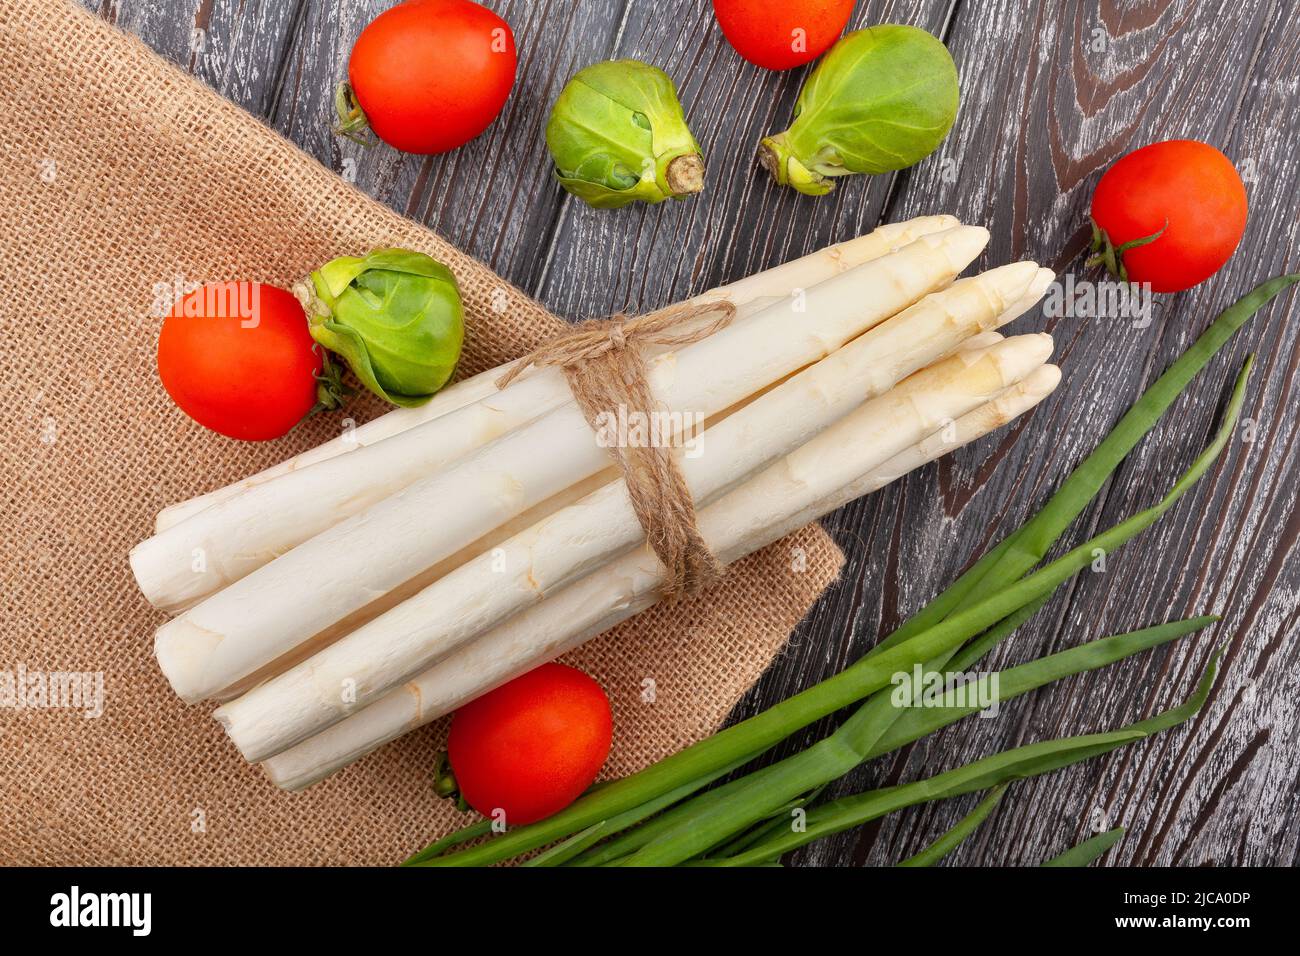 white asparagus on wood background top view Stock Photo